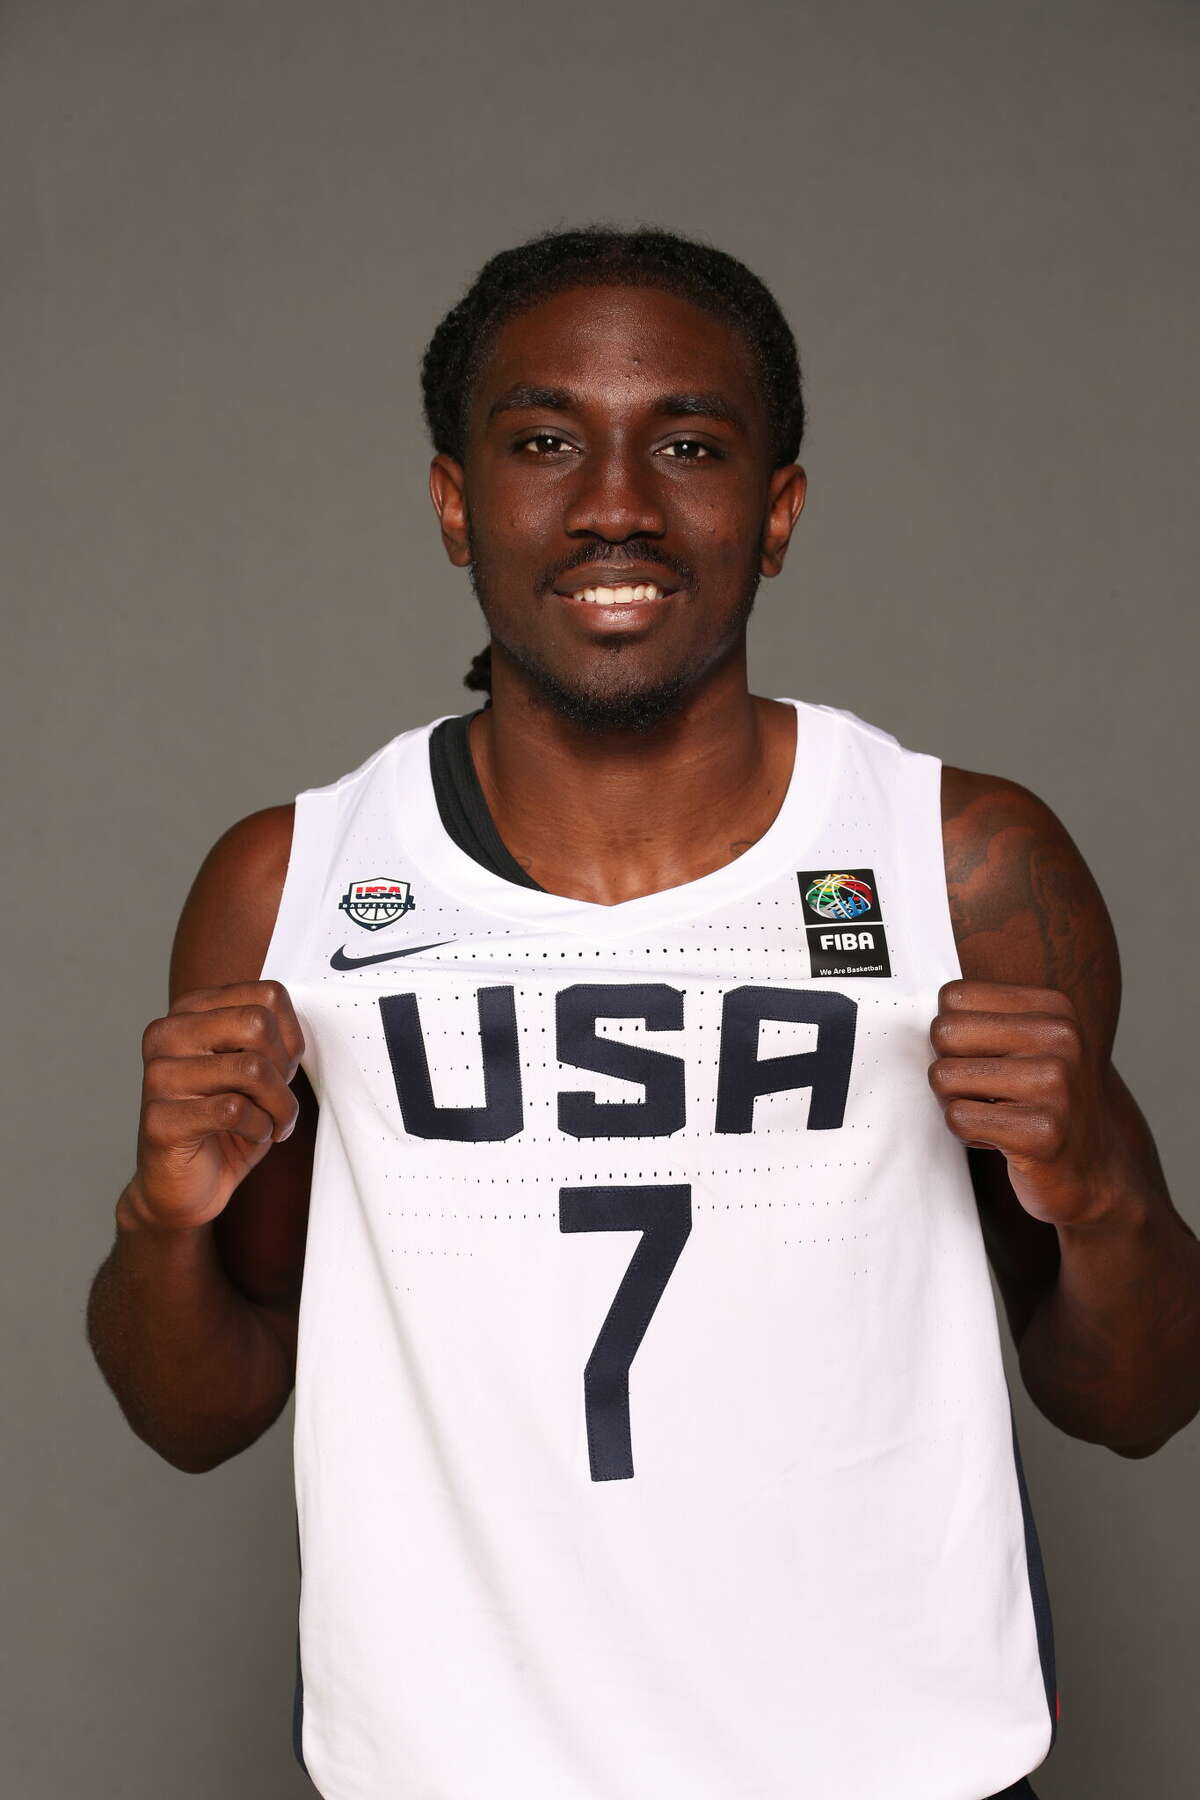 The six-foot-three, 185-pound guard who used to rock the rims at the Convocation Center is doing just that with his time with USA Basketball.